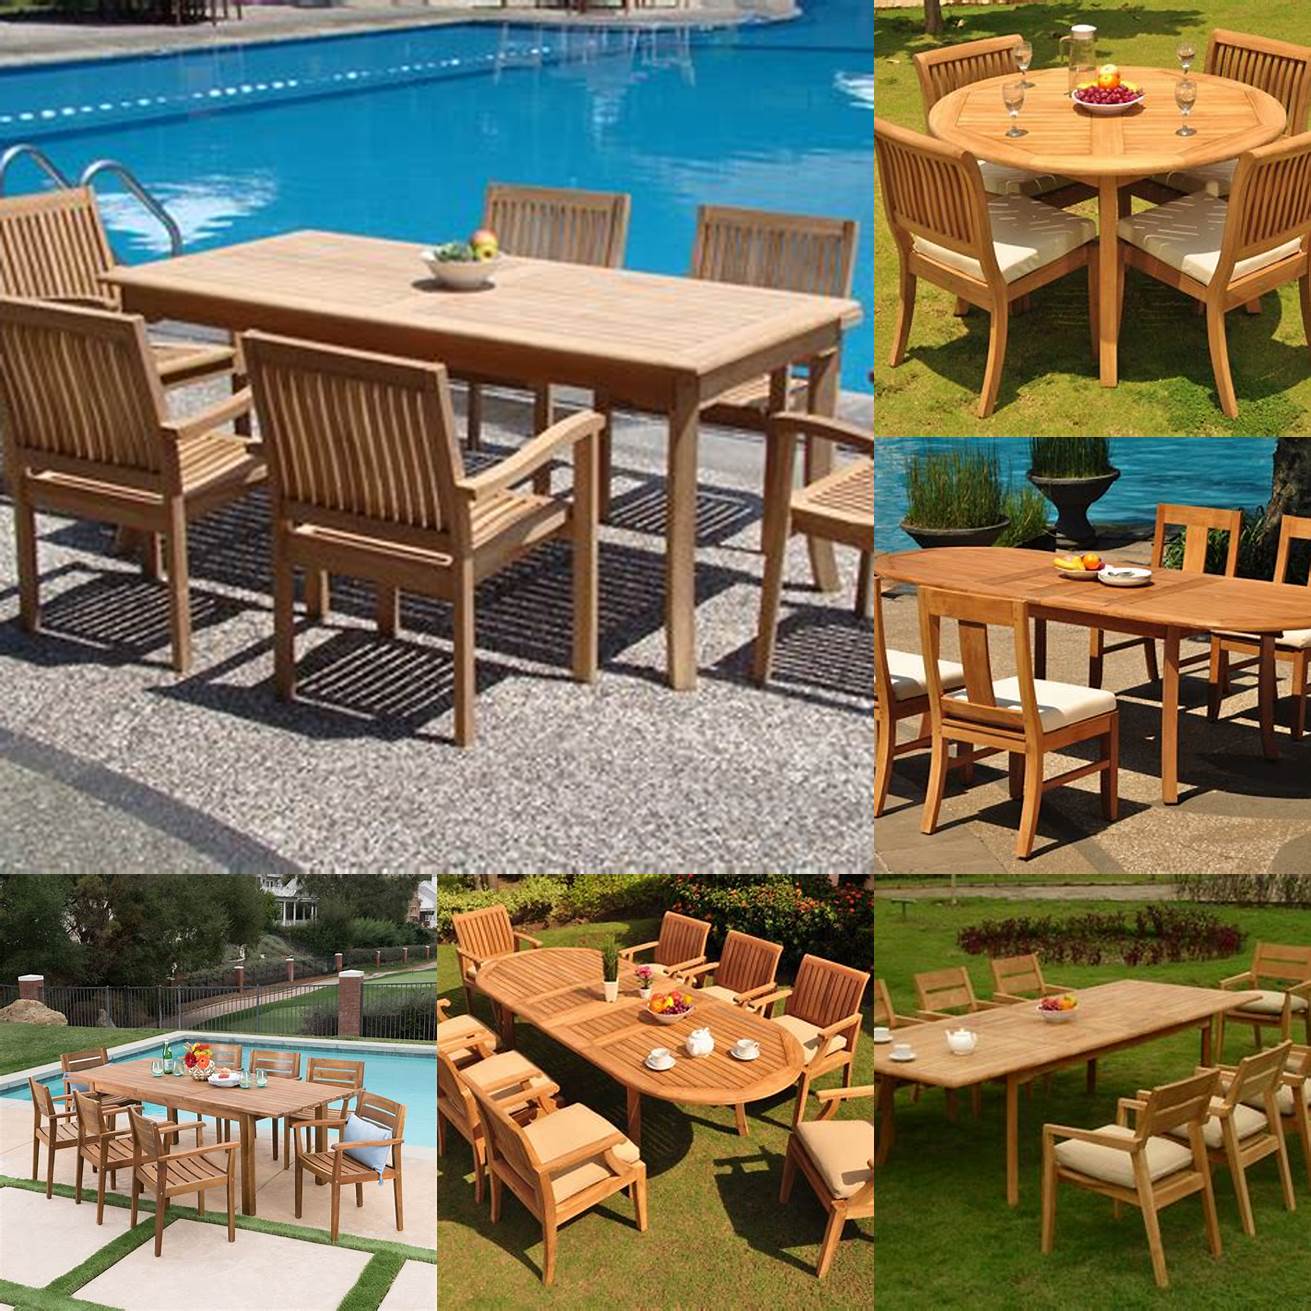 Classic Teak Outdoor Dining Table and Chairs